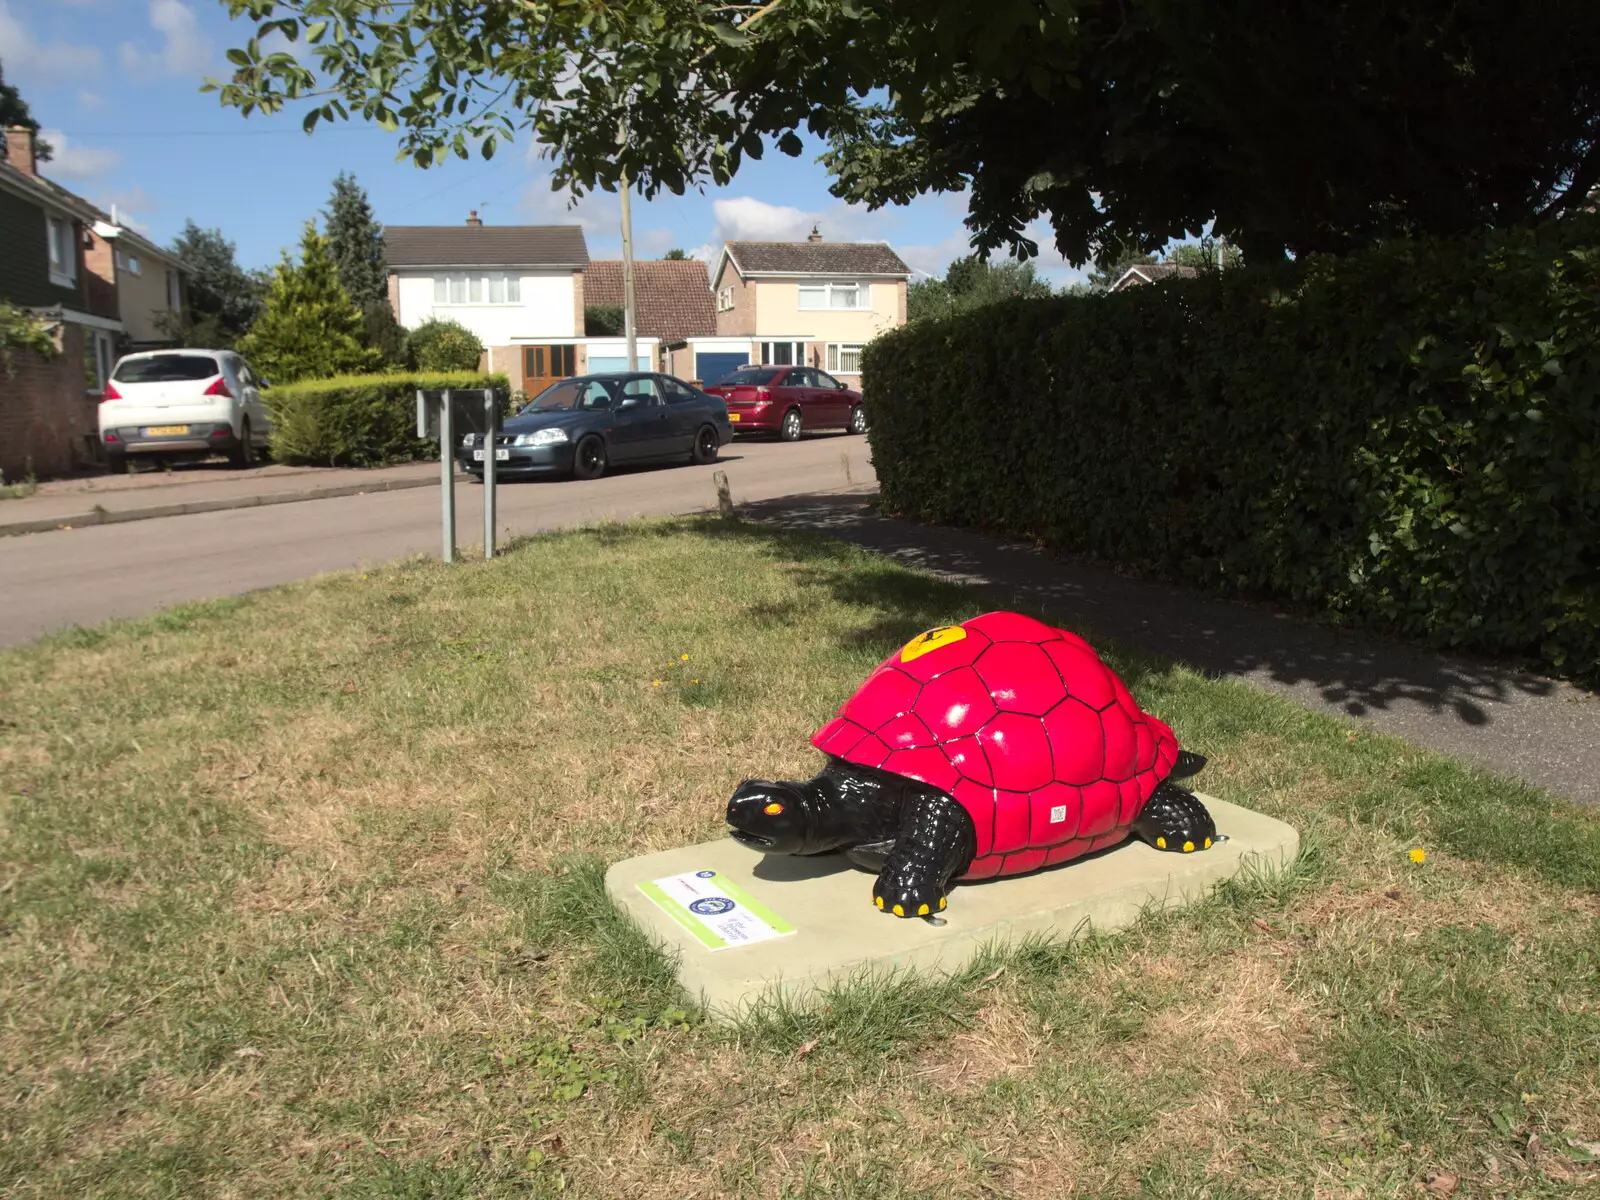 A Black and Red Ferrari hare on Millfield, from Meg-fest, and Sean Visits, Bressingham and Brome, Suffolk - 1st August 2021